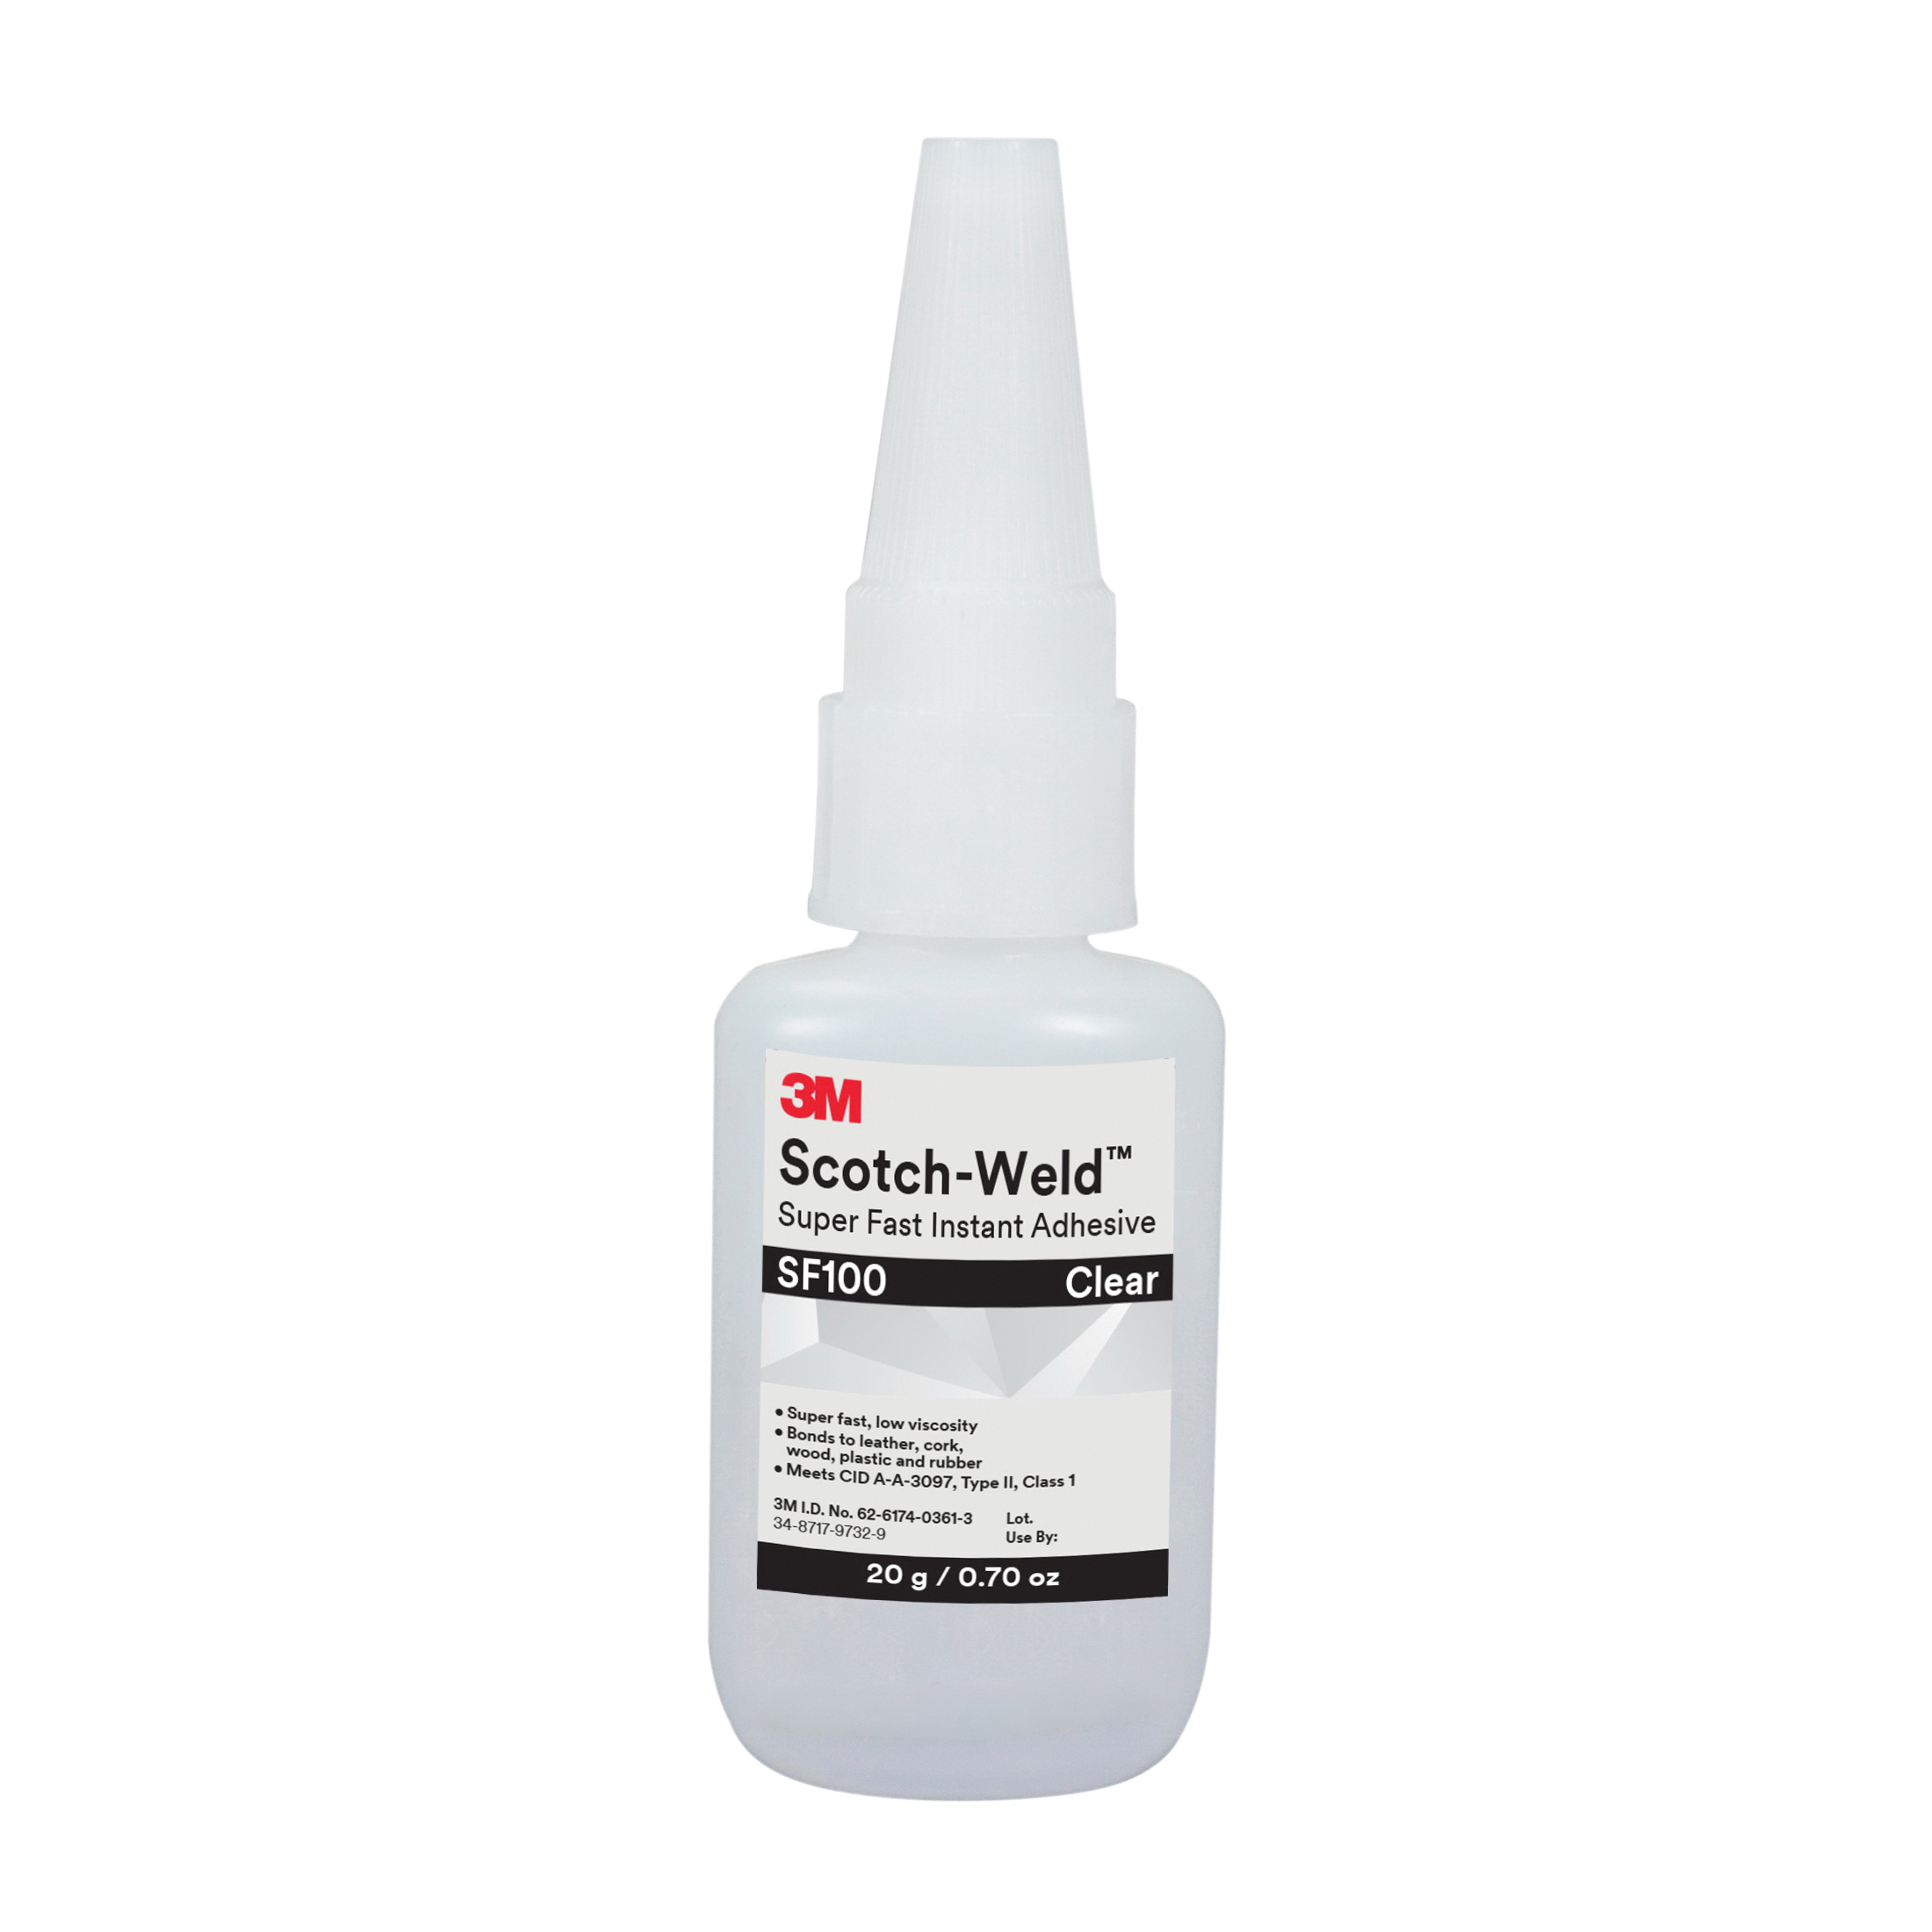 Loctite 135436 Prism 406 1-Part General Purpose Low Viscosity Instant  Adhesive, 20 g Bottle, Clear, 24 hr Curing